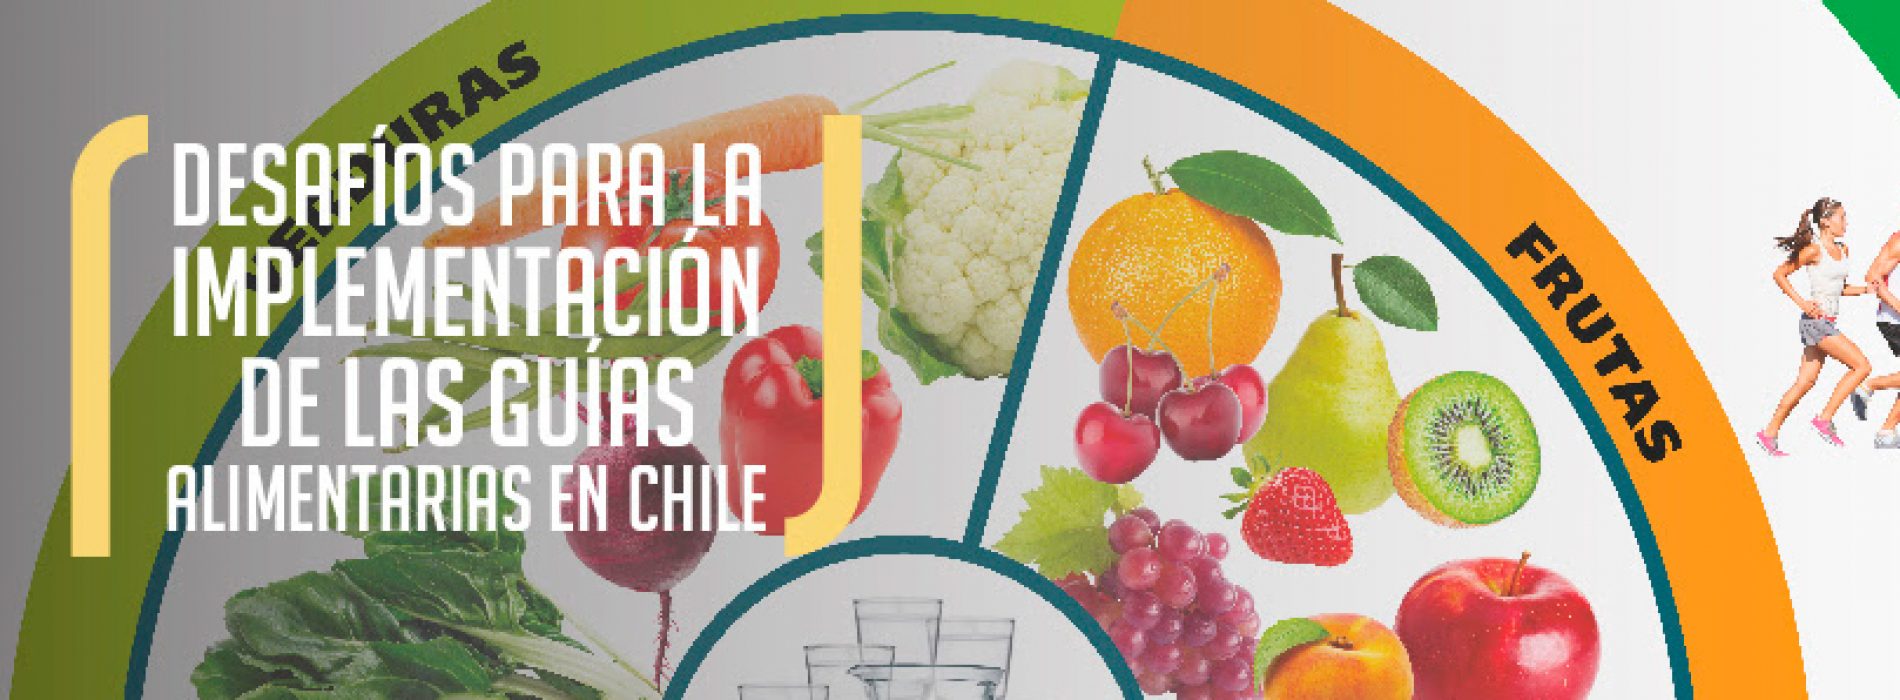 Update you! Course of challenges to the implementation of the dietary guidelines in Chile